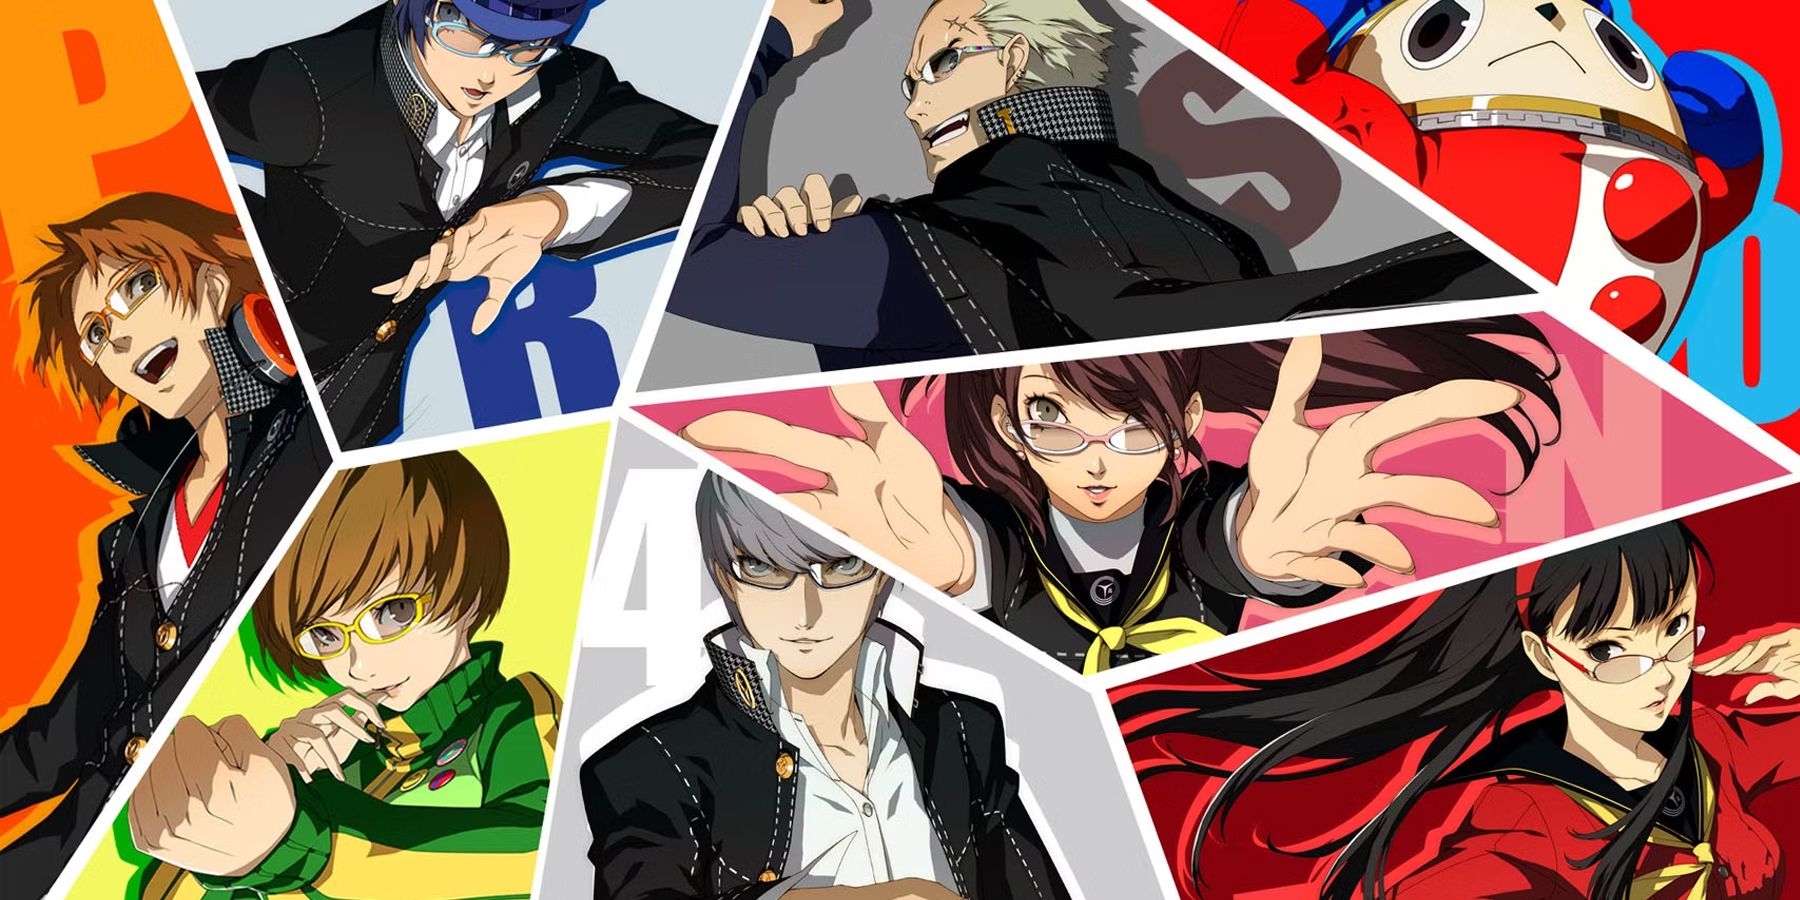 Persona 4: Every Party Member’s Strongest Persona